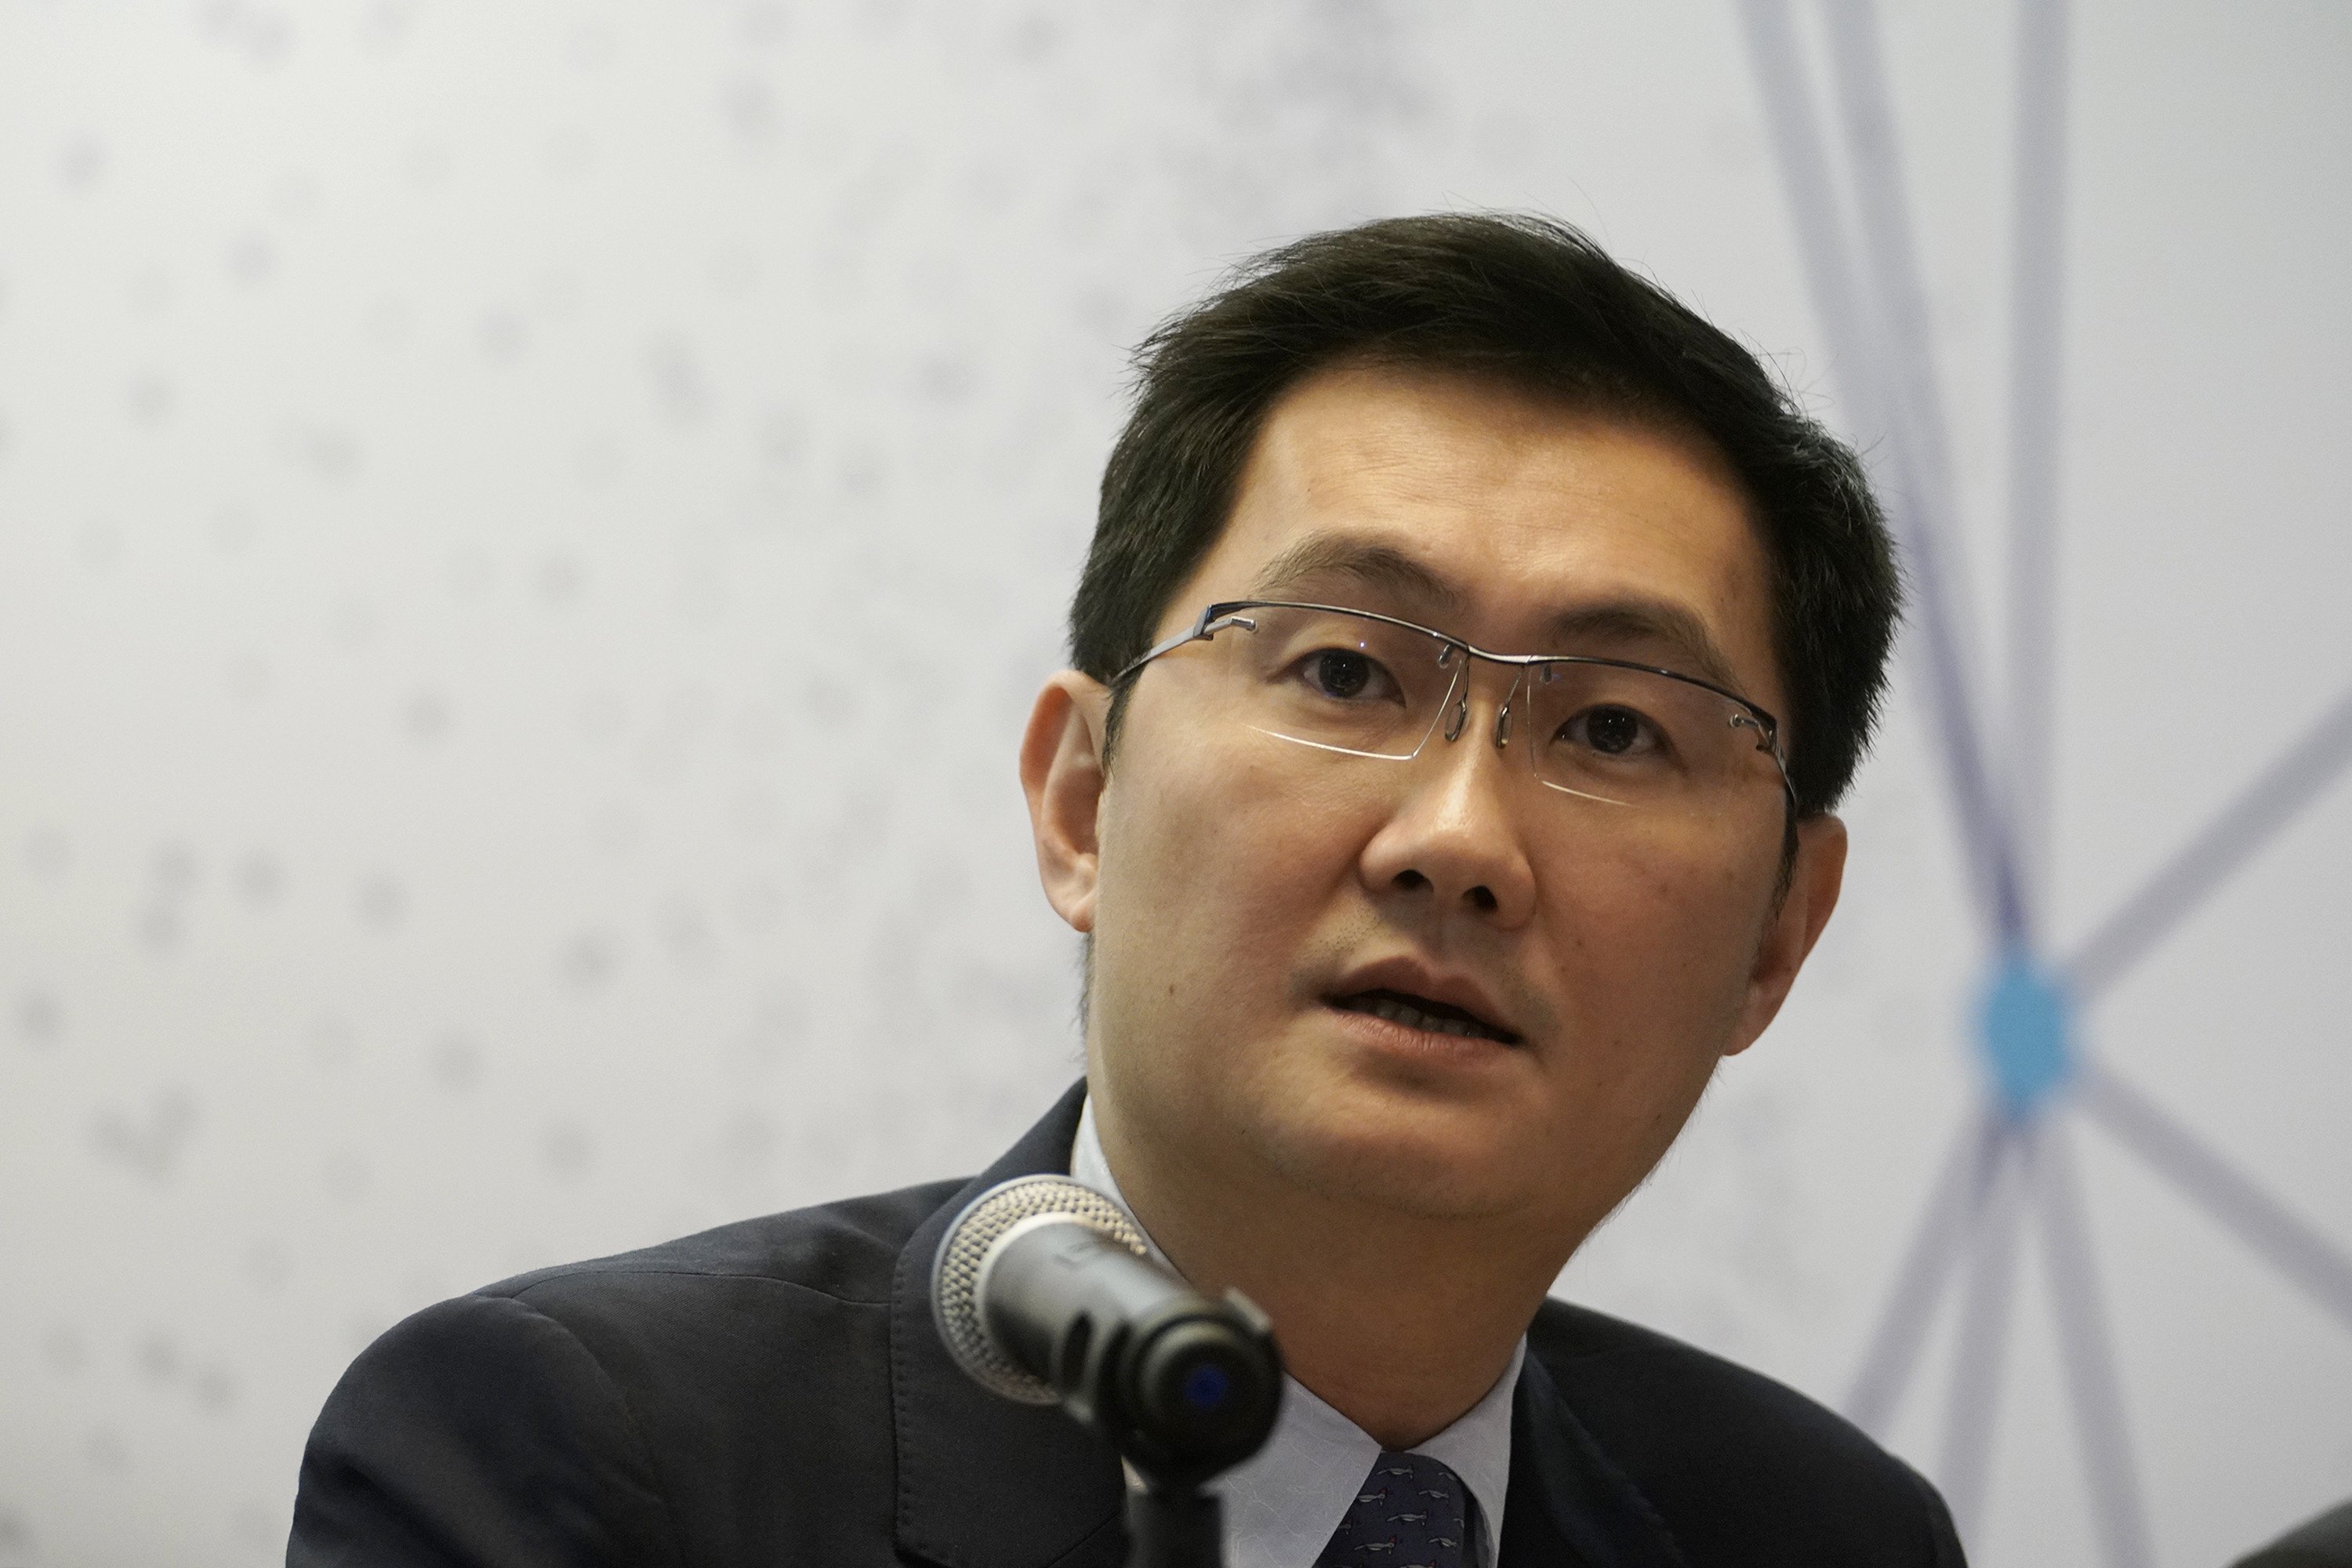 Ma Huateng, chairman and CEO of Tencent Holdings, has praised China’s new policy plan to boost the private economy. Photo: Bloomberg